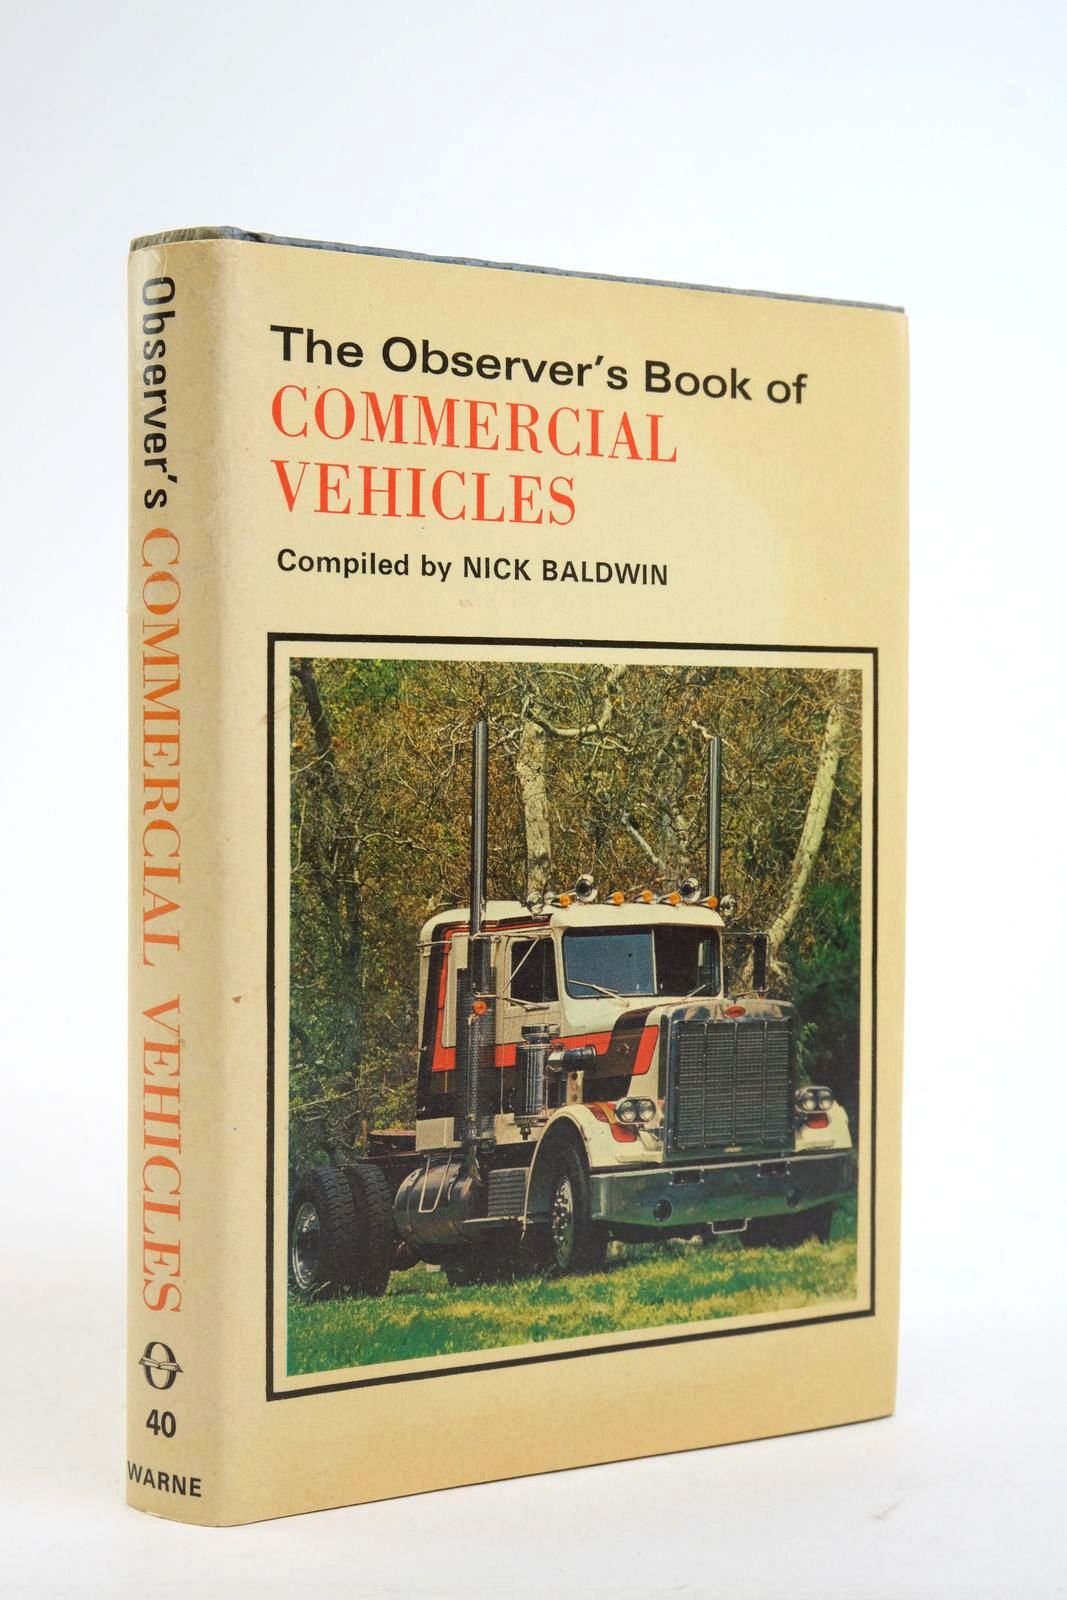 Photo of THE OBSERVER'S BOOK OF COMMERCIAL VEHICLES written by Baldwin, Nick published by Frederick Warne &amp; Co Ltd. (STOCK CODE: 2136305)  for sale by Stella & Rose's Books